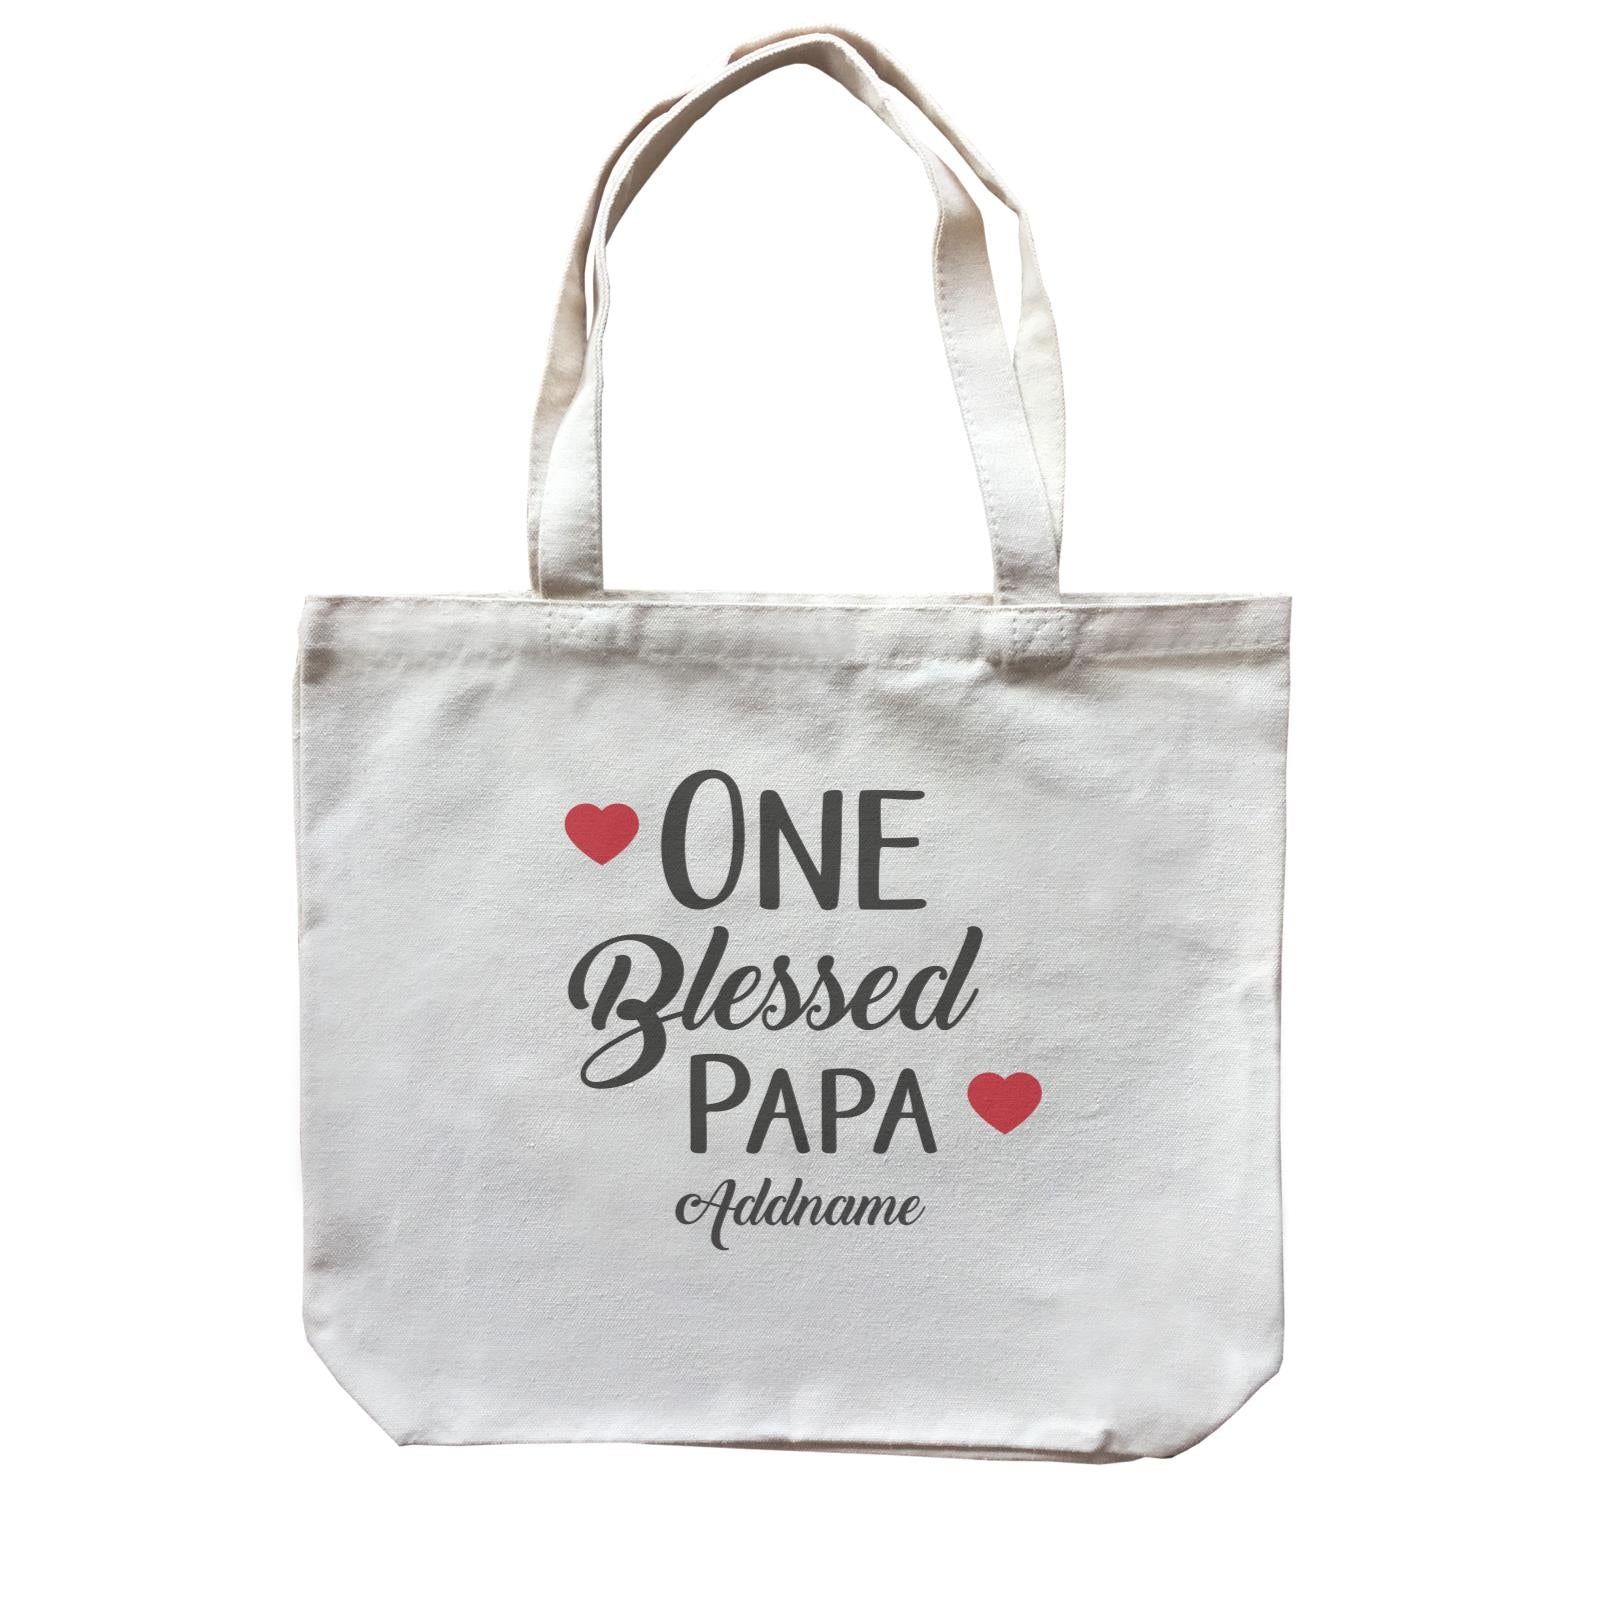 Christian Series One Blessed Papa Addname Canvas Bag